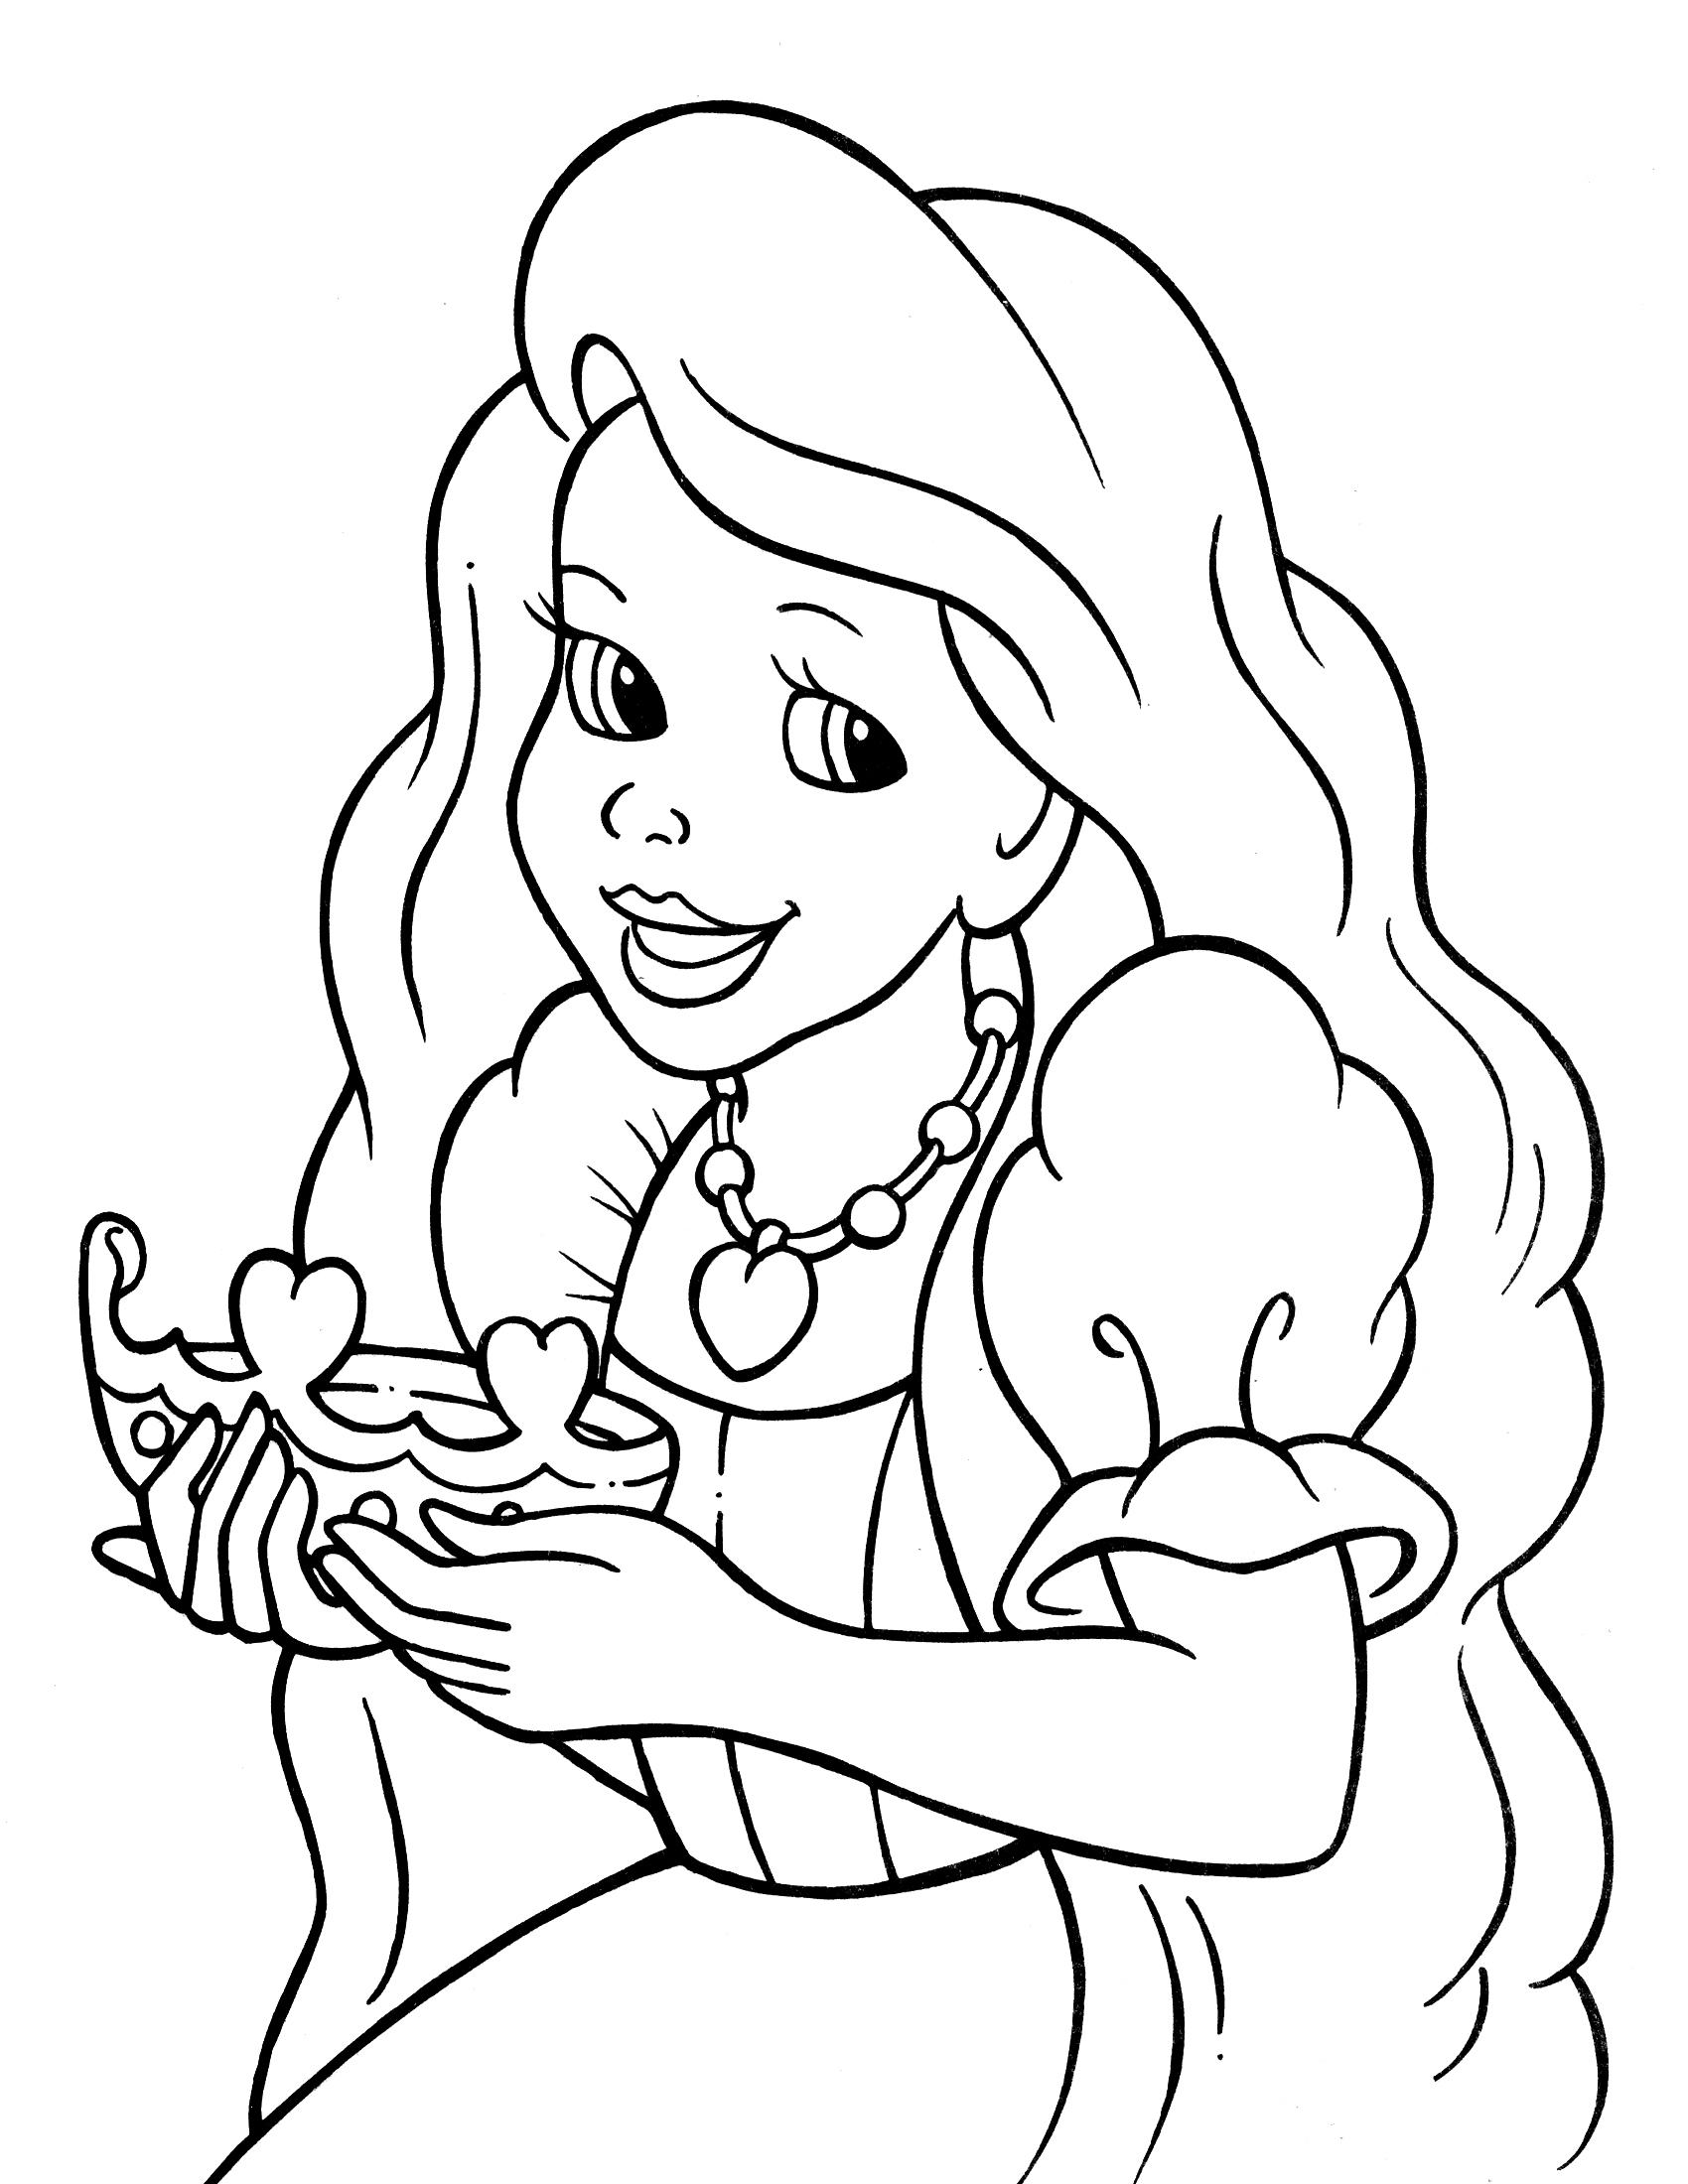 Crayola Free Printable Christmas Coloring Pages